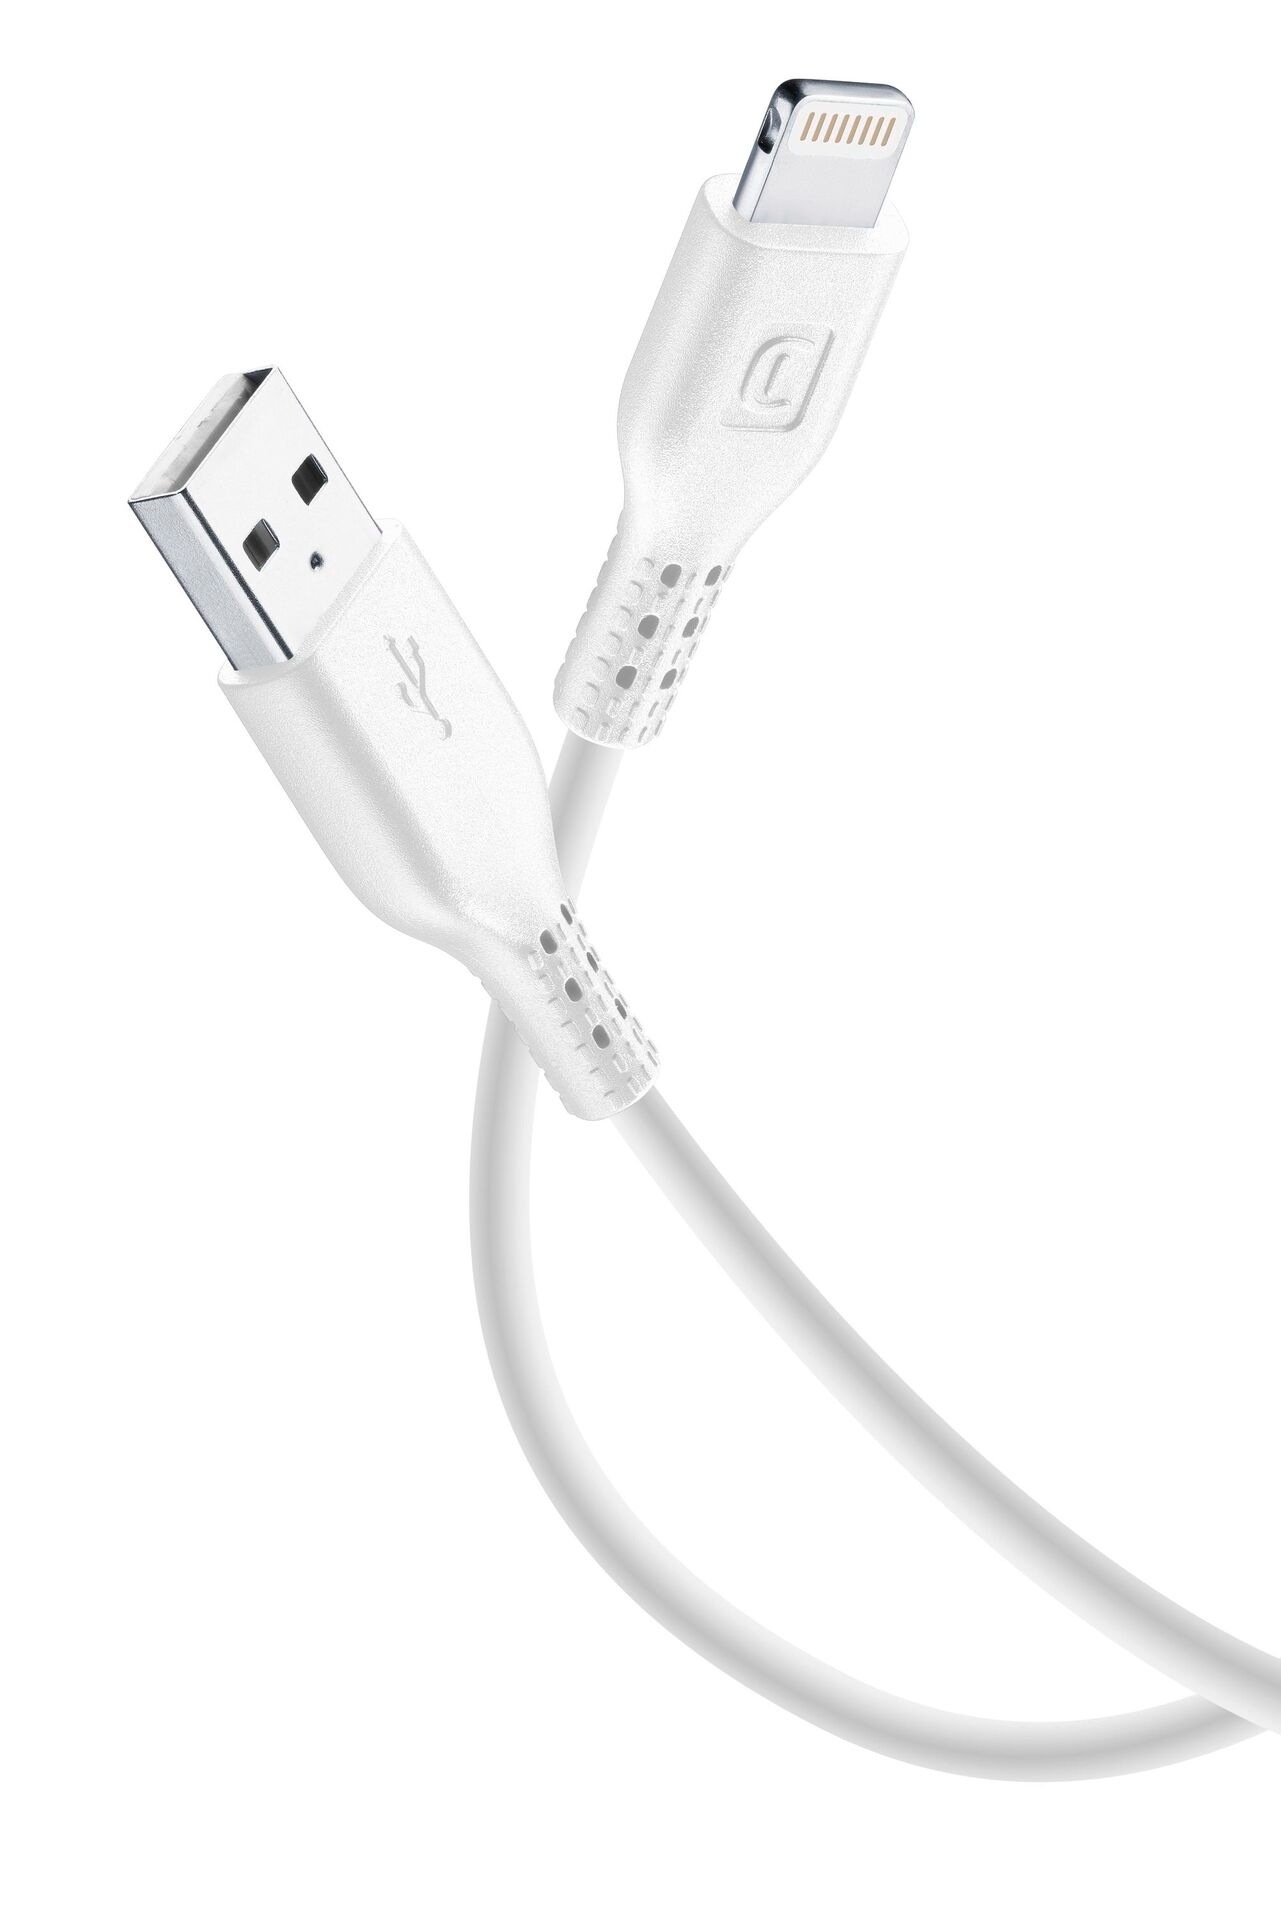 Cellularline Lightningkabel »Power Data Cable Lightning«, Online Lightning-USB USB-A Shop cm m 0,6 jetzt im A, 60 / Typ OTTO